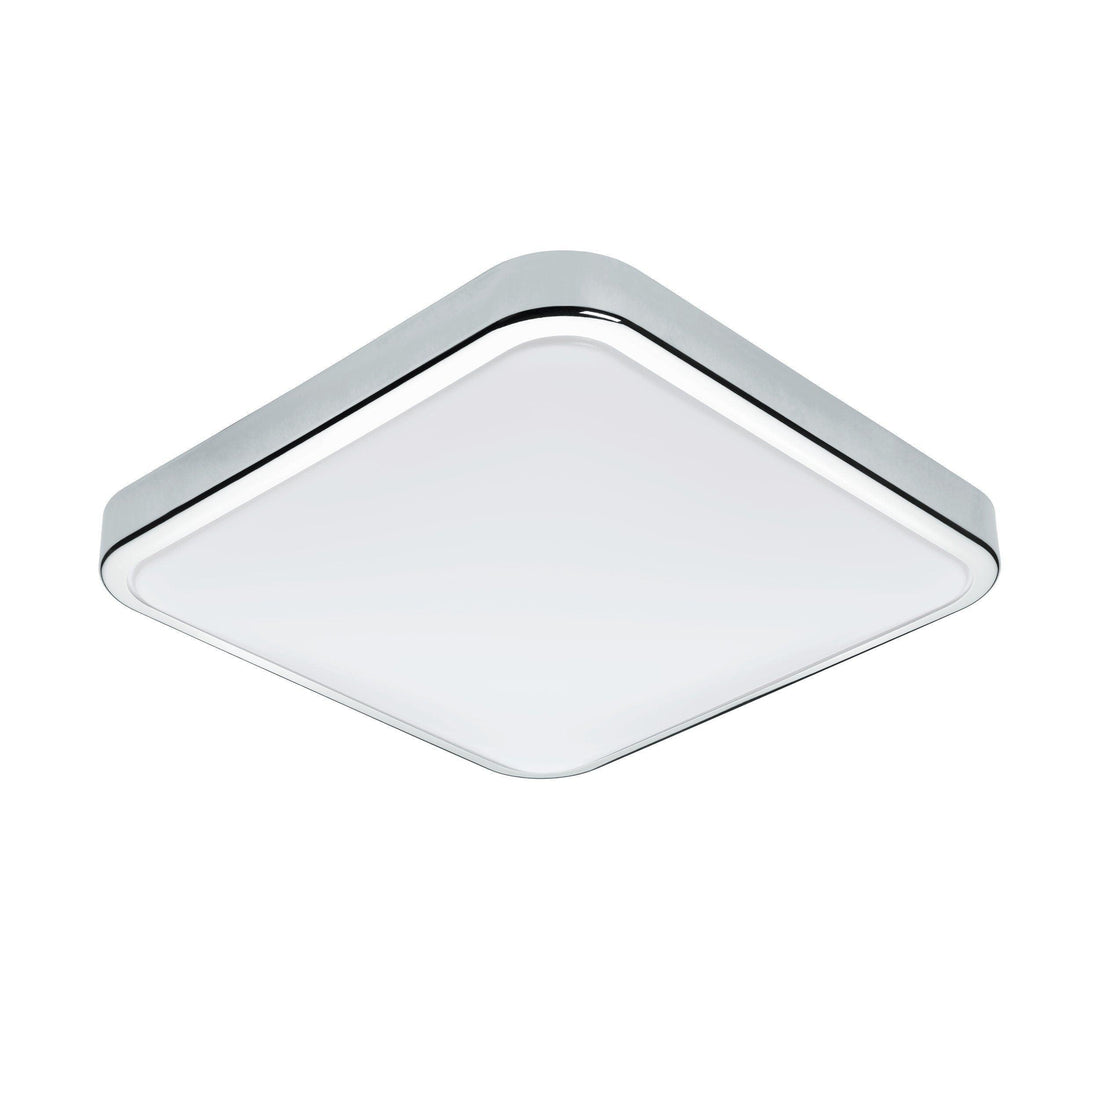 MANILVA Ceiling Light by The Light Library